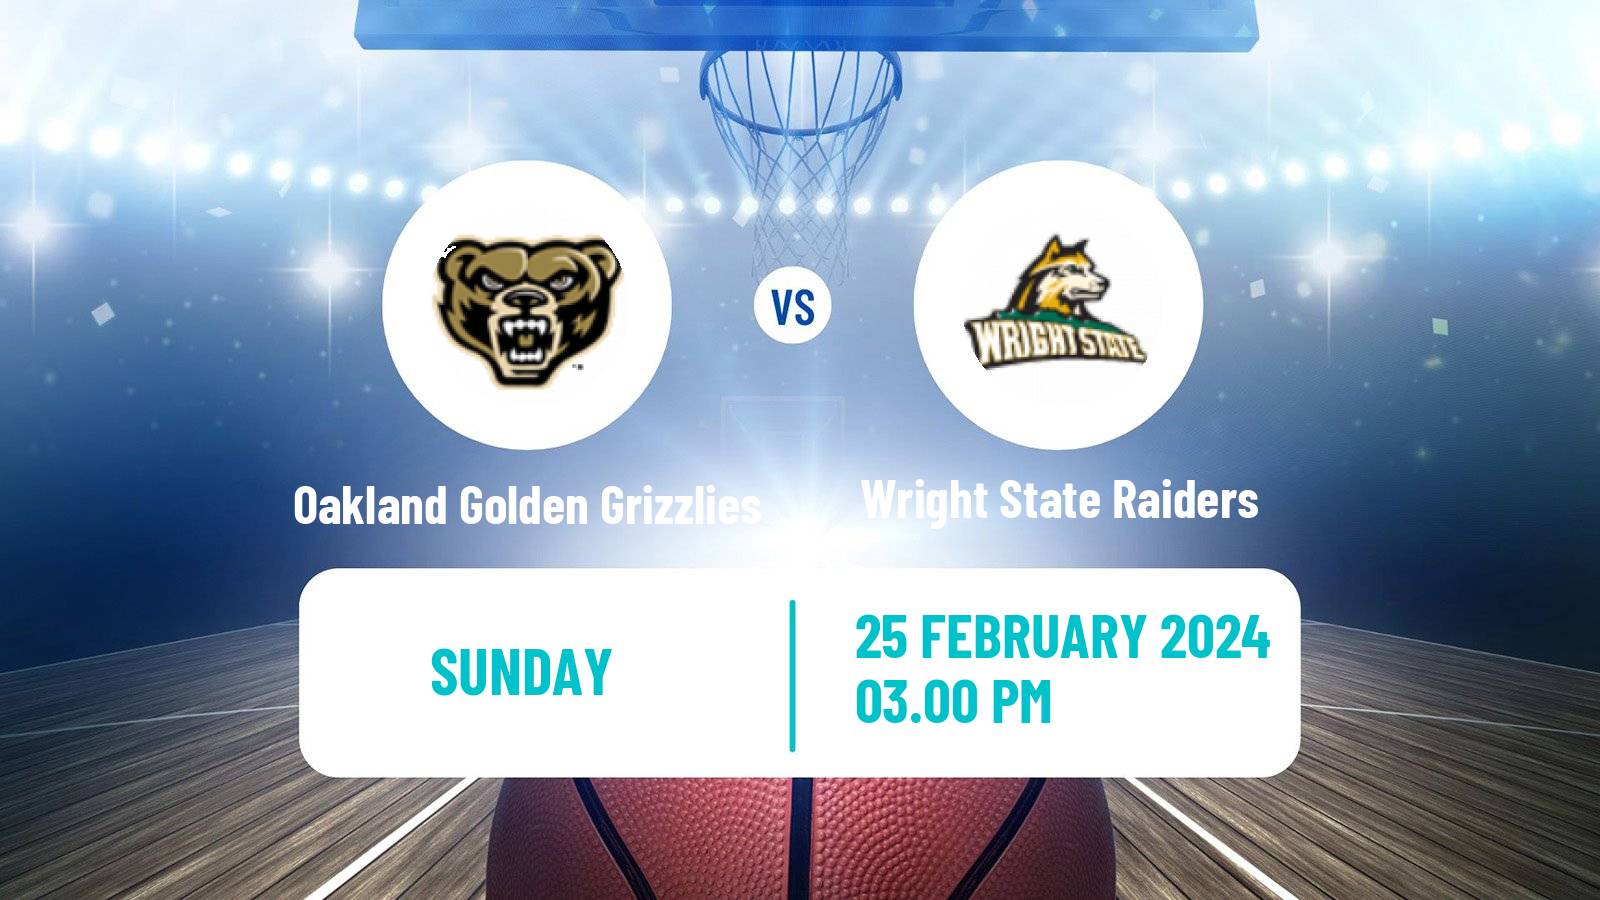 Basketball NCAA College Basketball Oakland Golden Grizzlies - Wright State Raiders